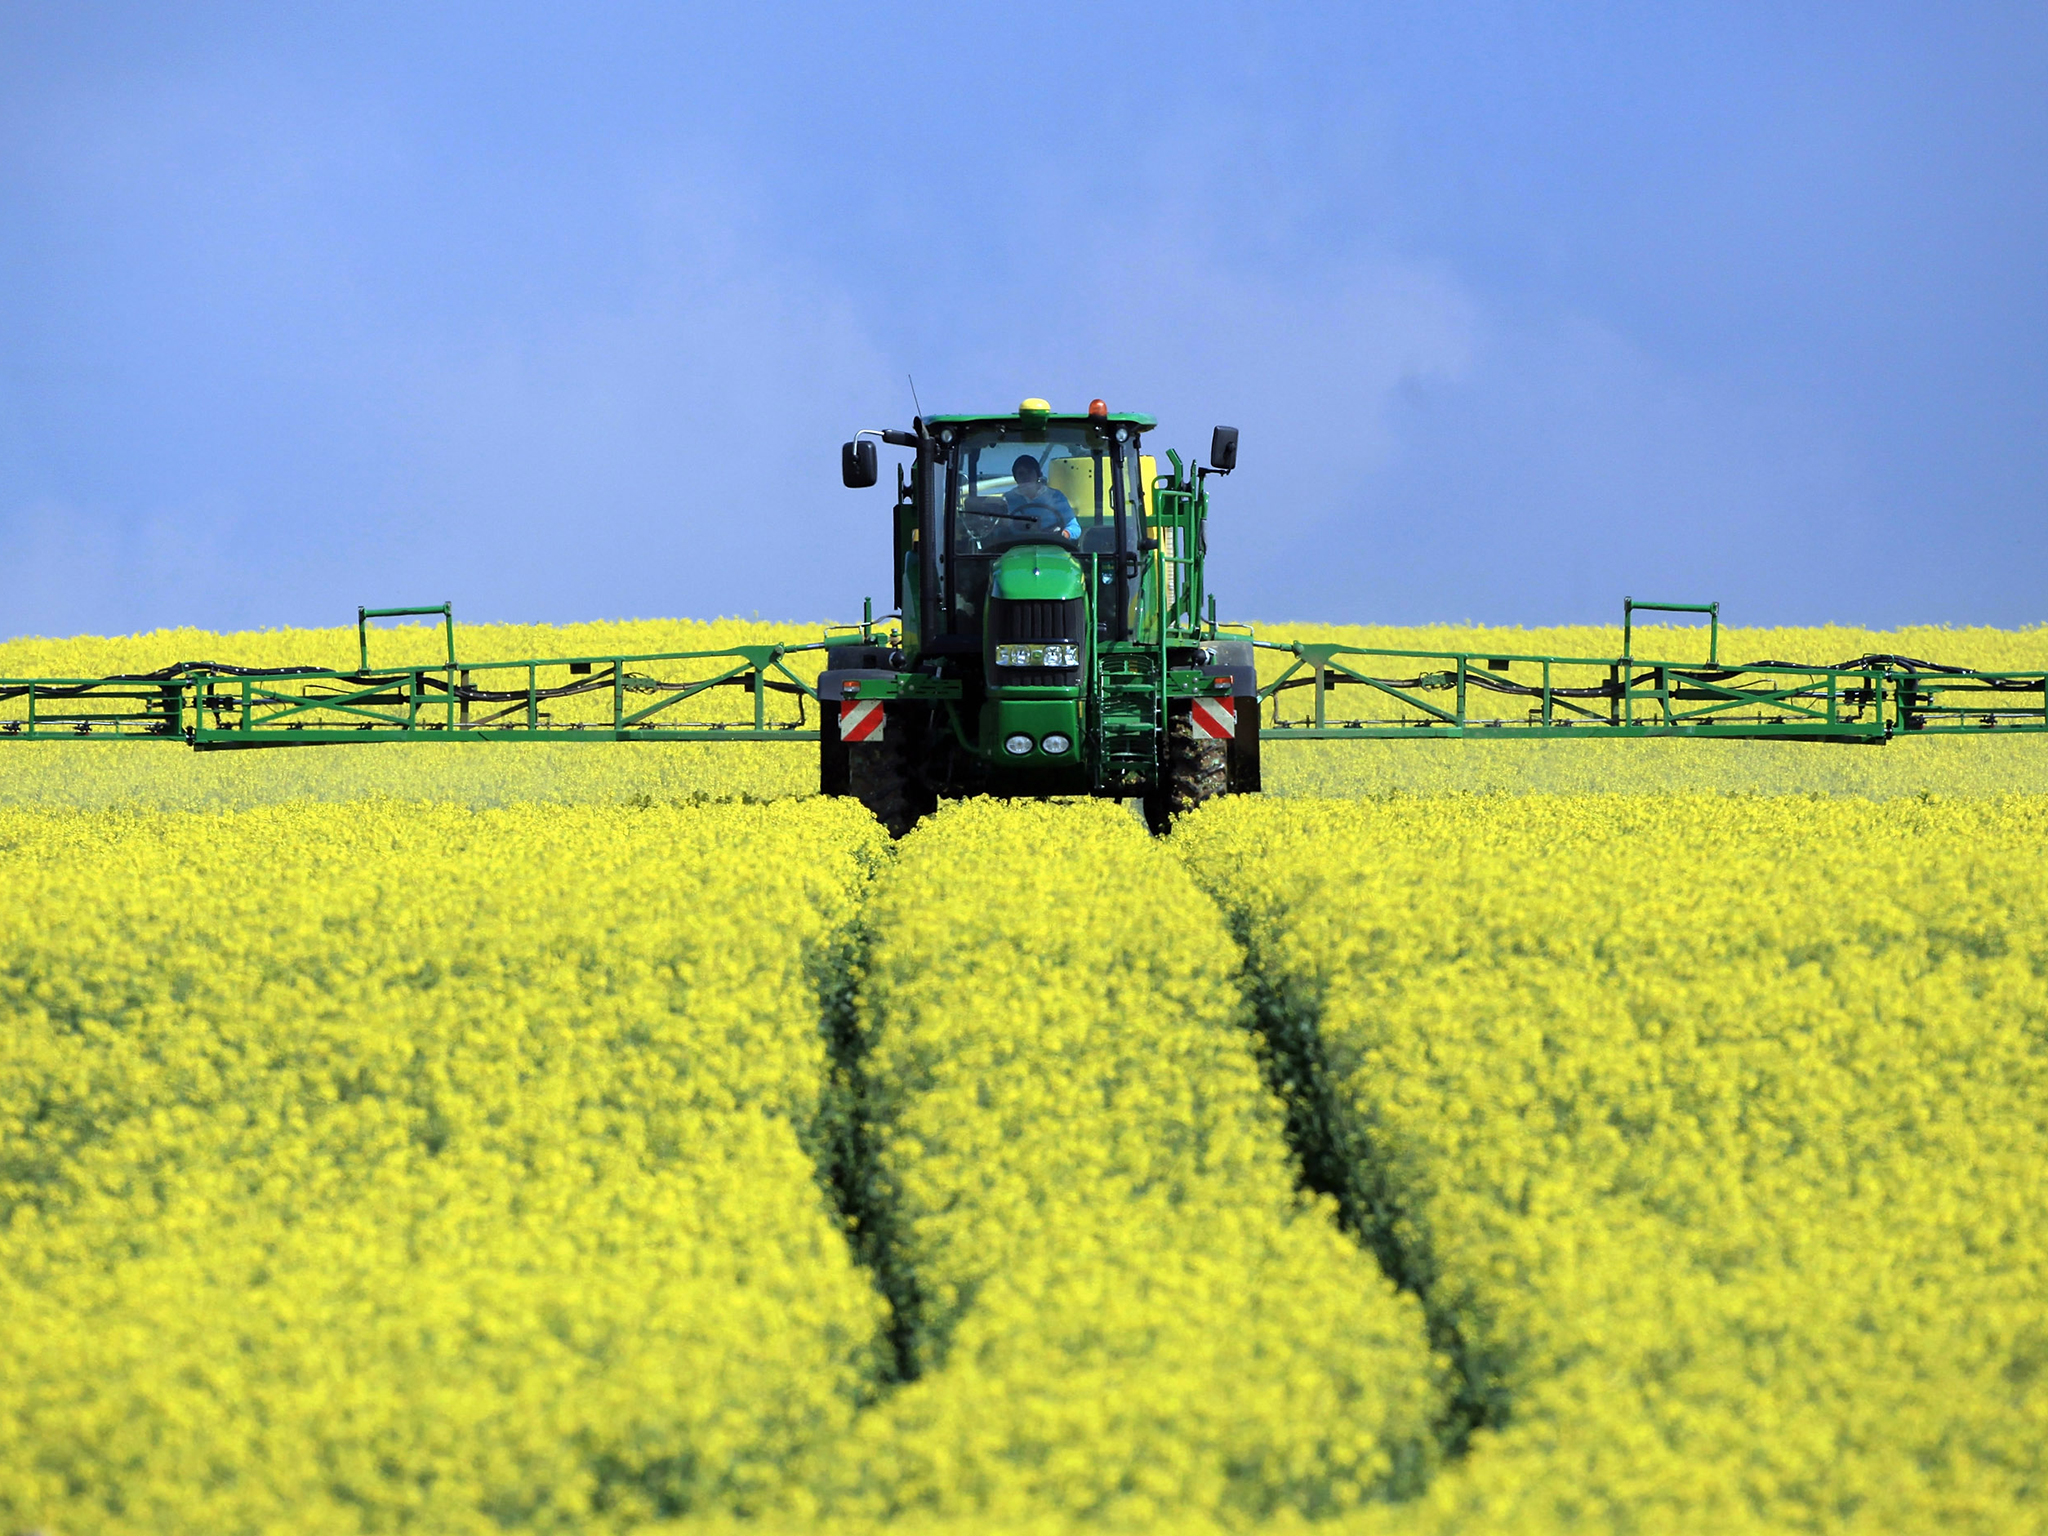 The survey says establishing oilseed rape crops this autumn has been challenging